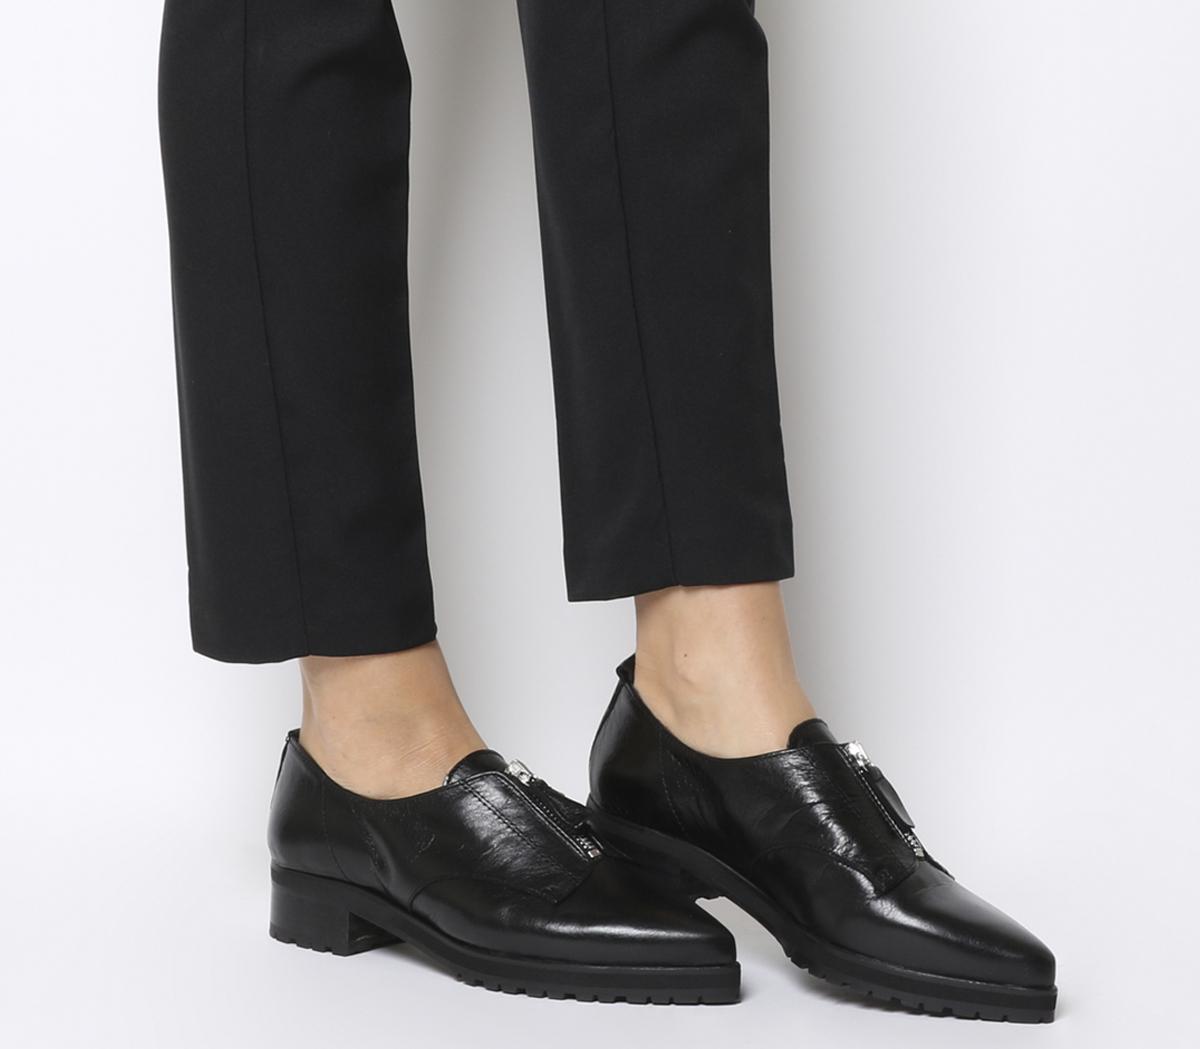 black leather flat shoes